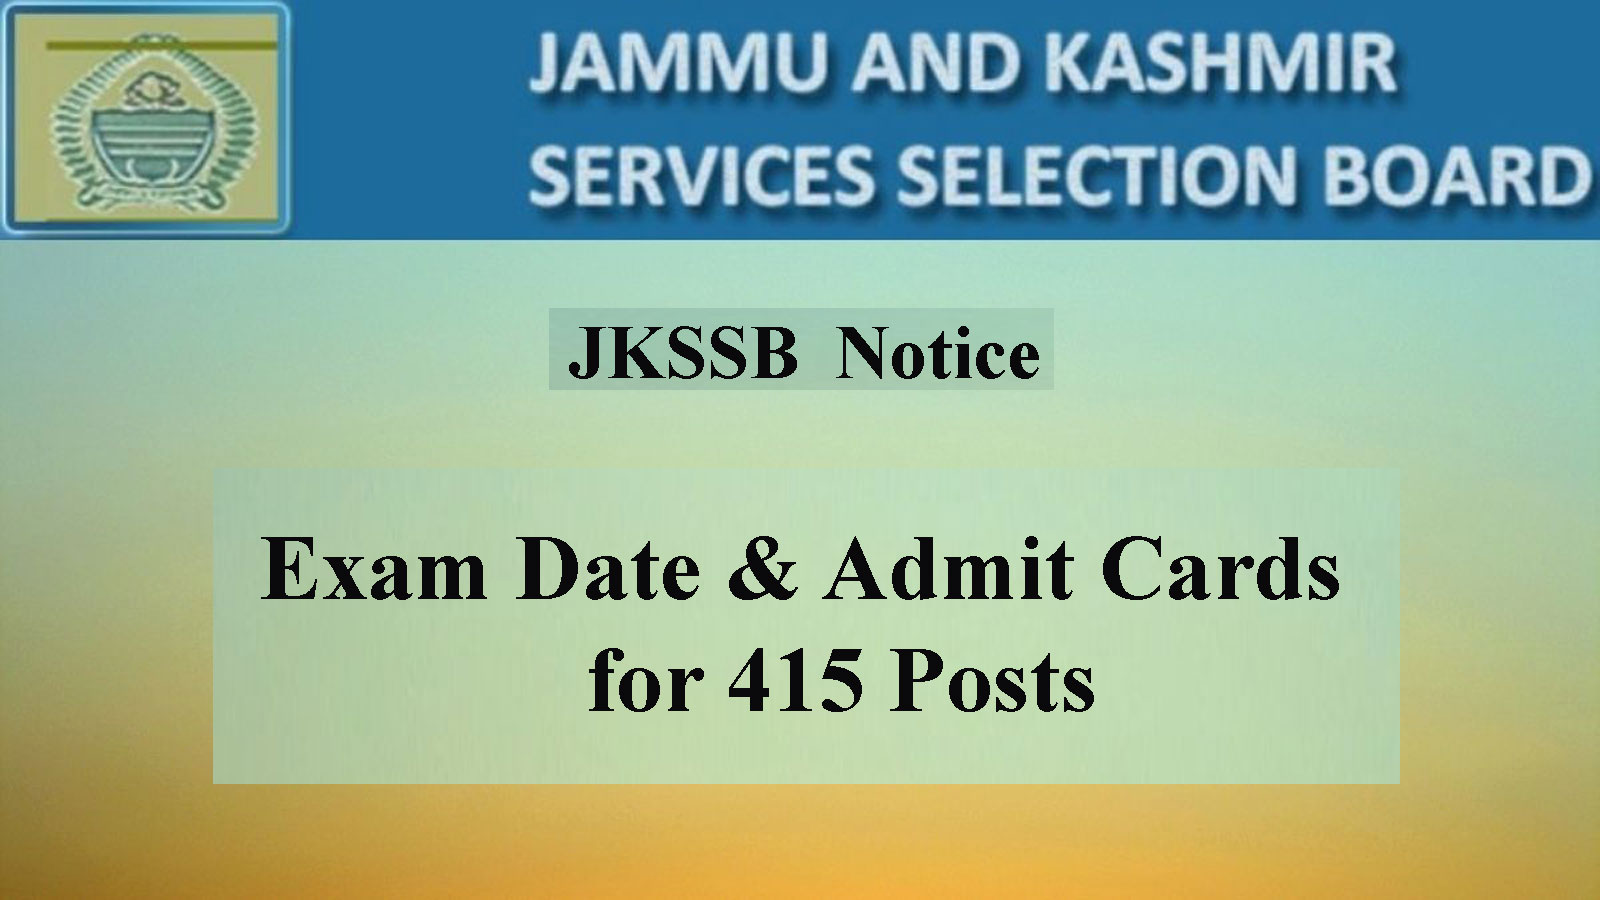 JKSSB: Notice for release of Admit cards of 415 Posts